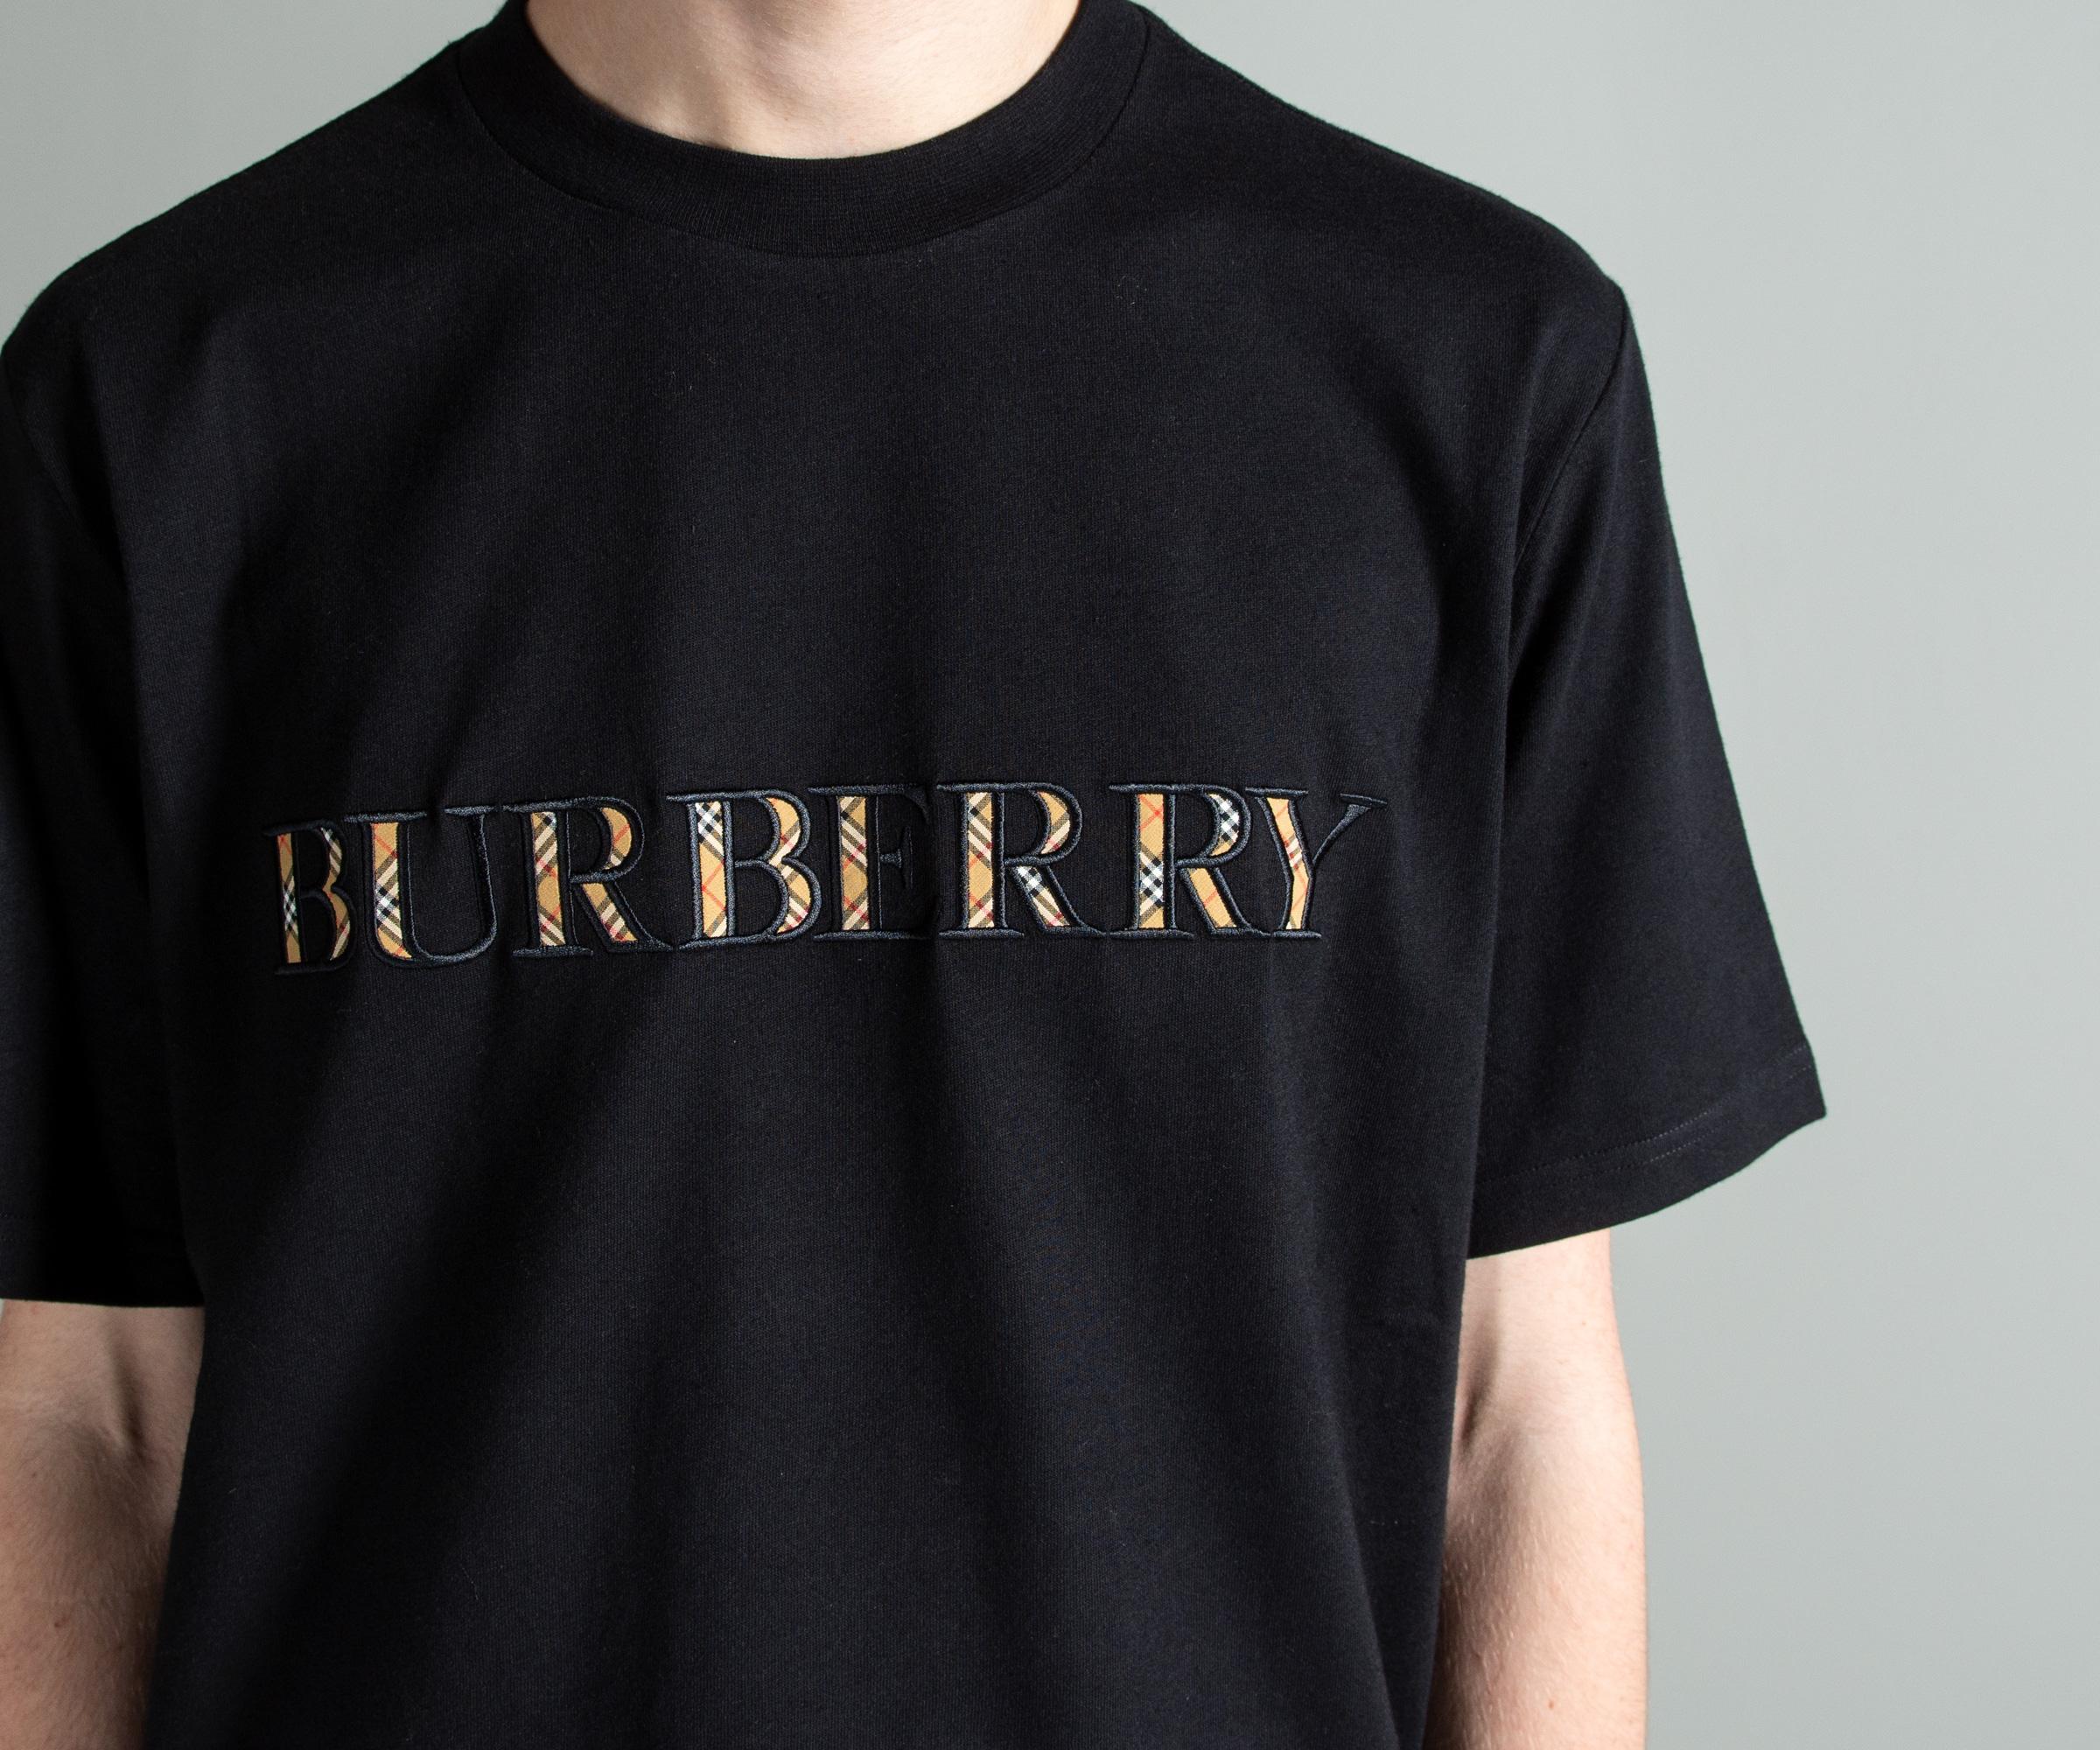 buy > burberry sabeto t shirt > Up to 64% OFF > Free shipping